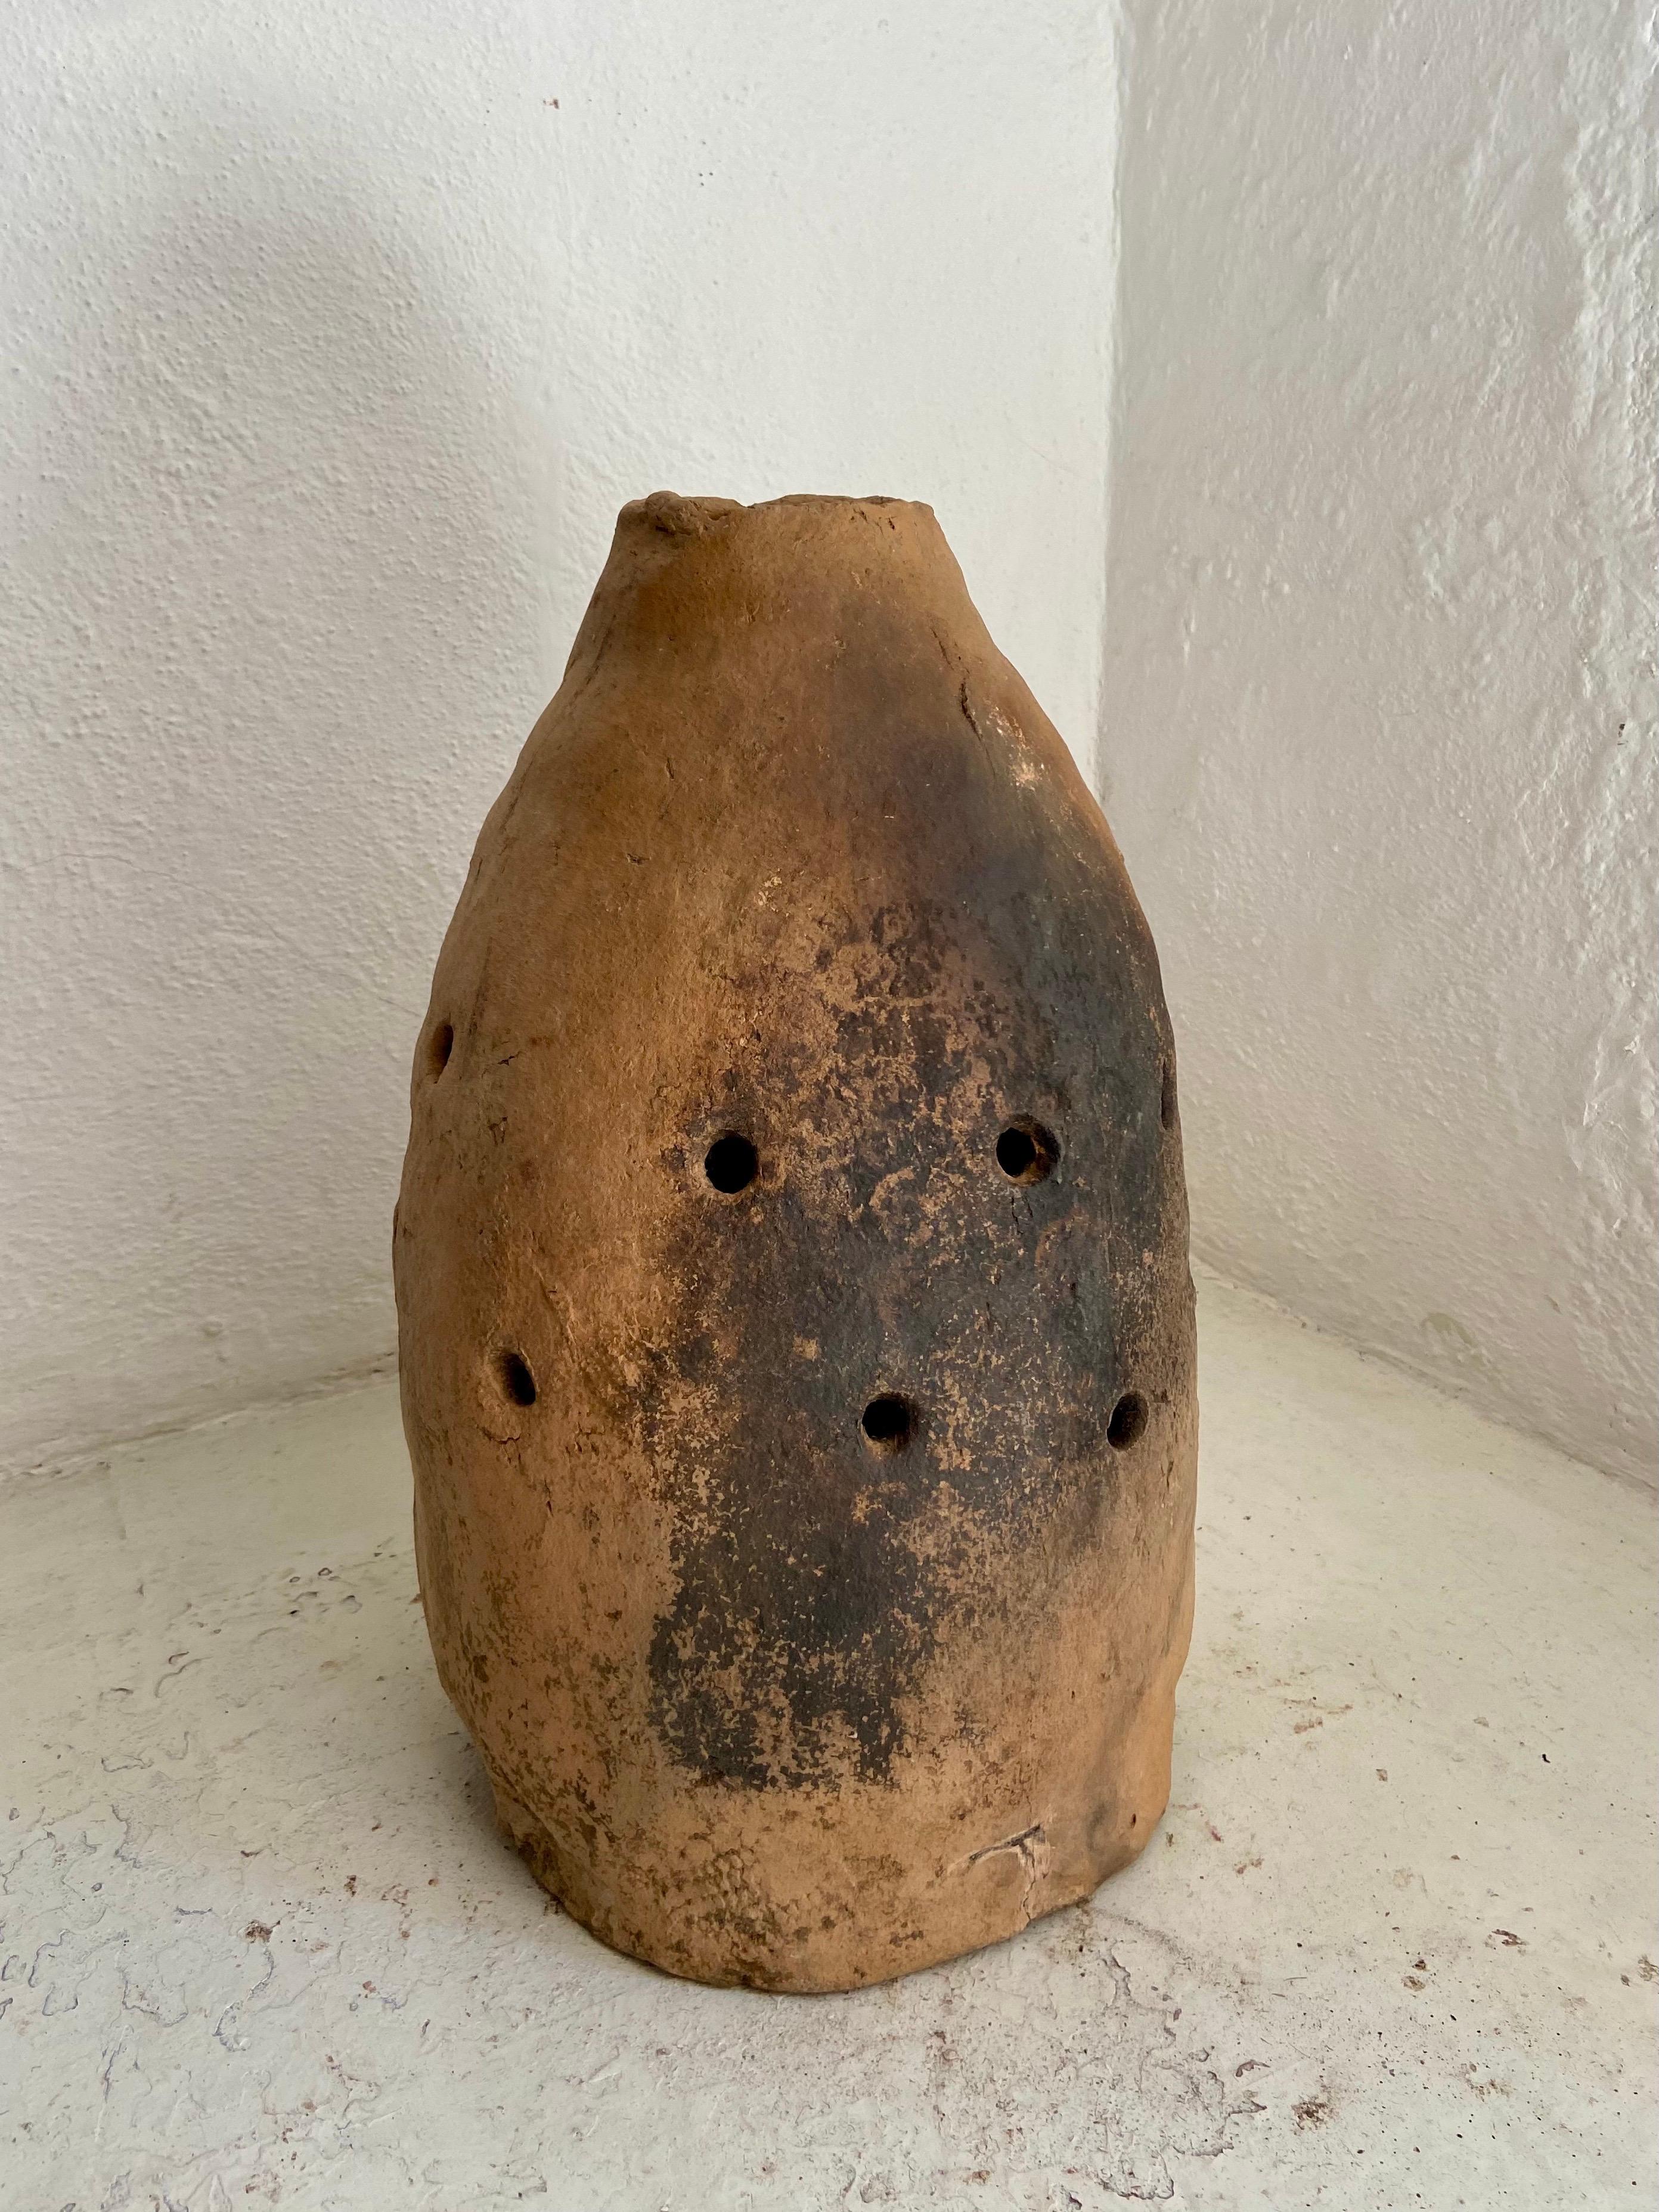 Primitive Early 20th Century Terracotta Dome Heater from a Remote Mexican Village